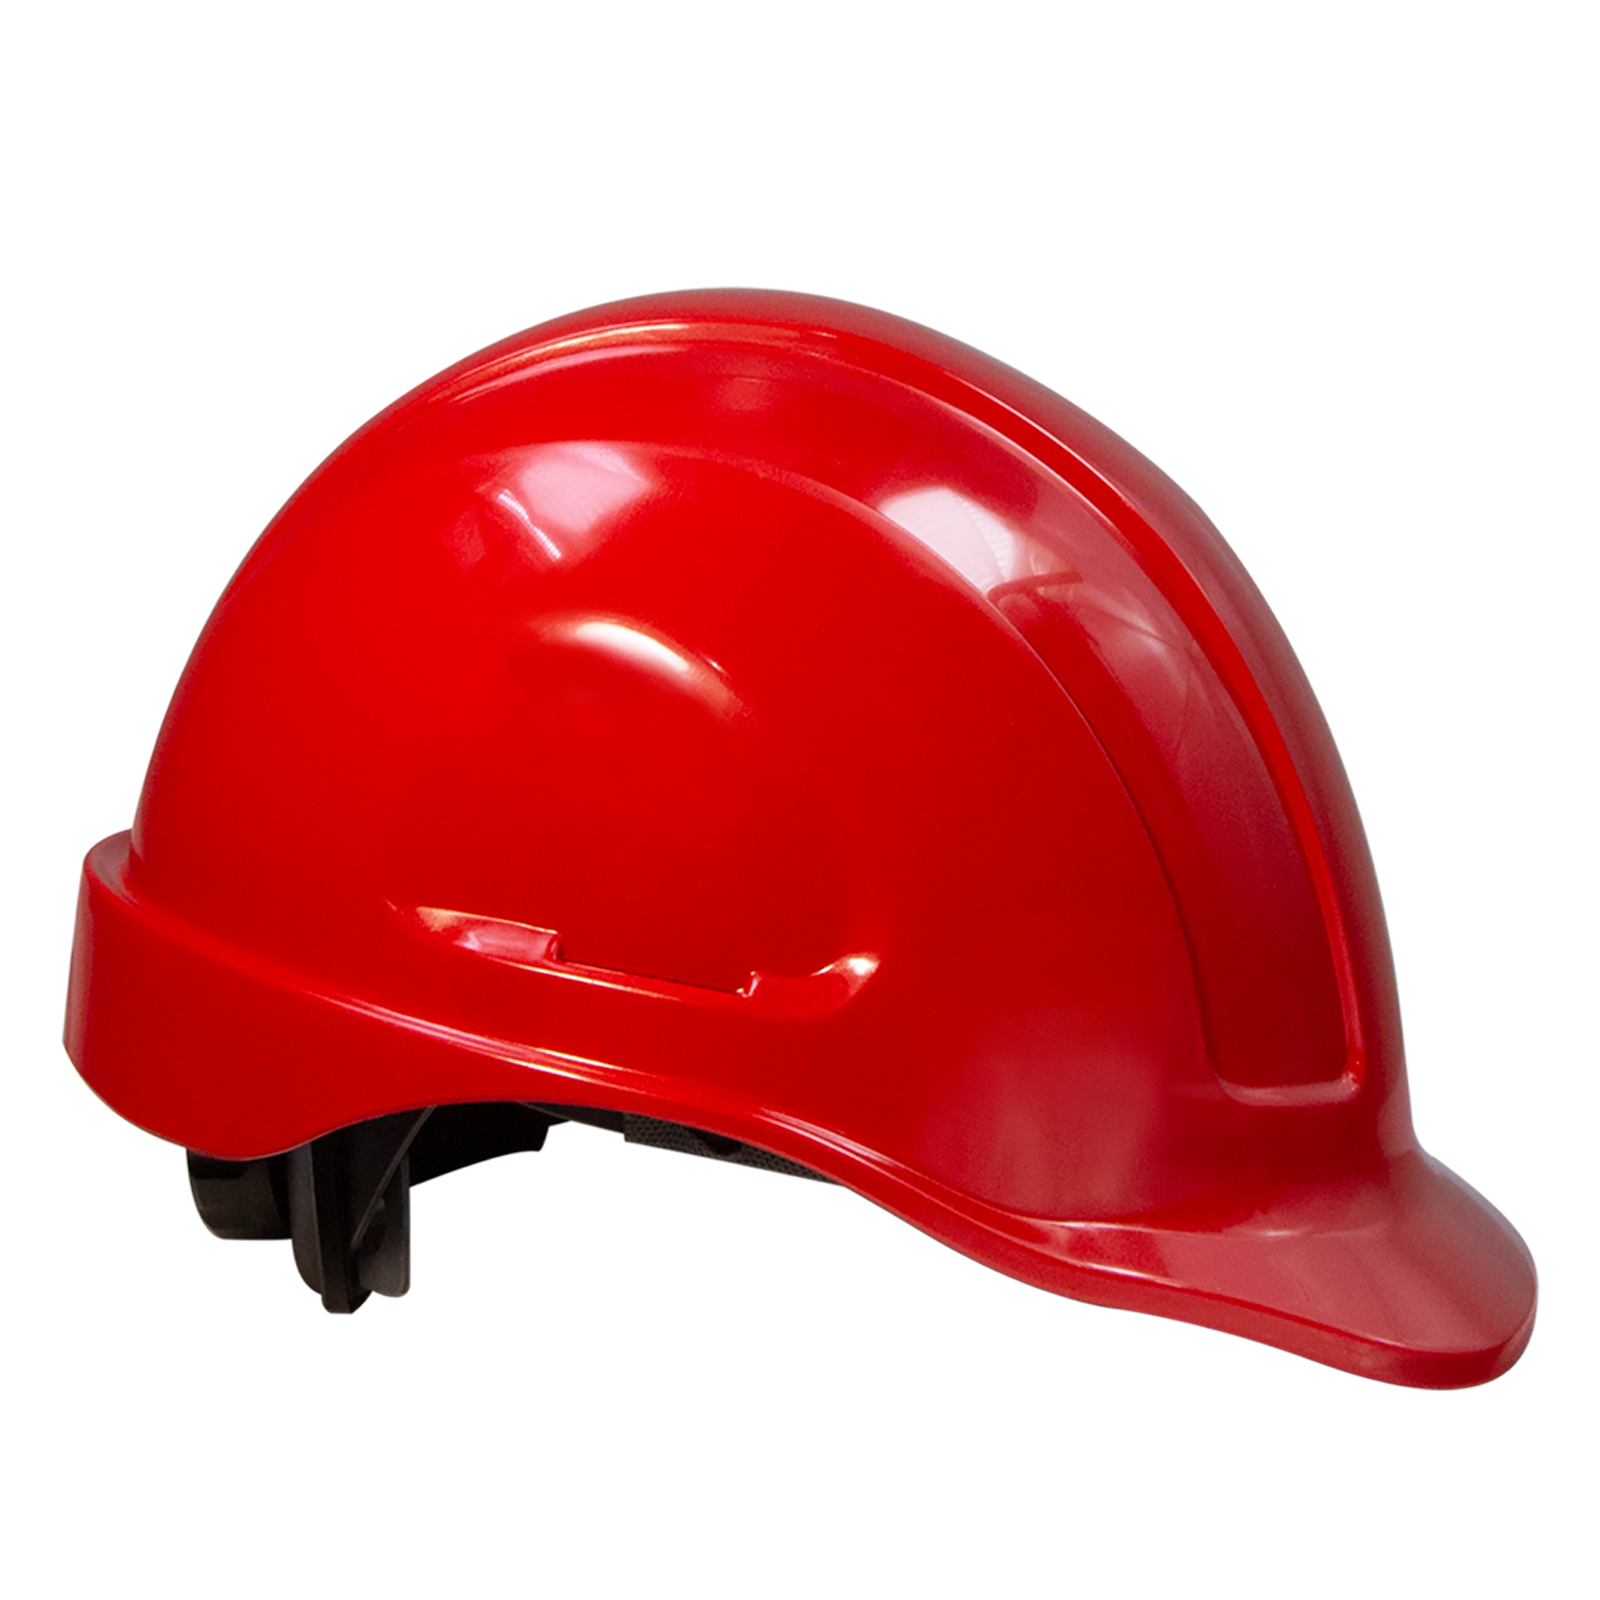 Diagonal view of a red cap stile safety hard hat with 4 point suspension Type I Class C, E,G